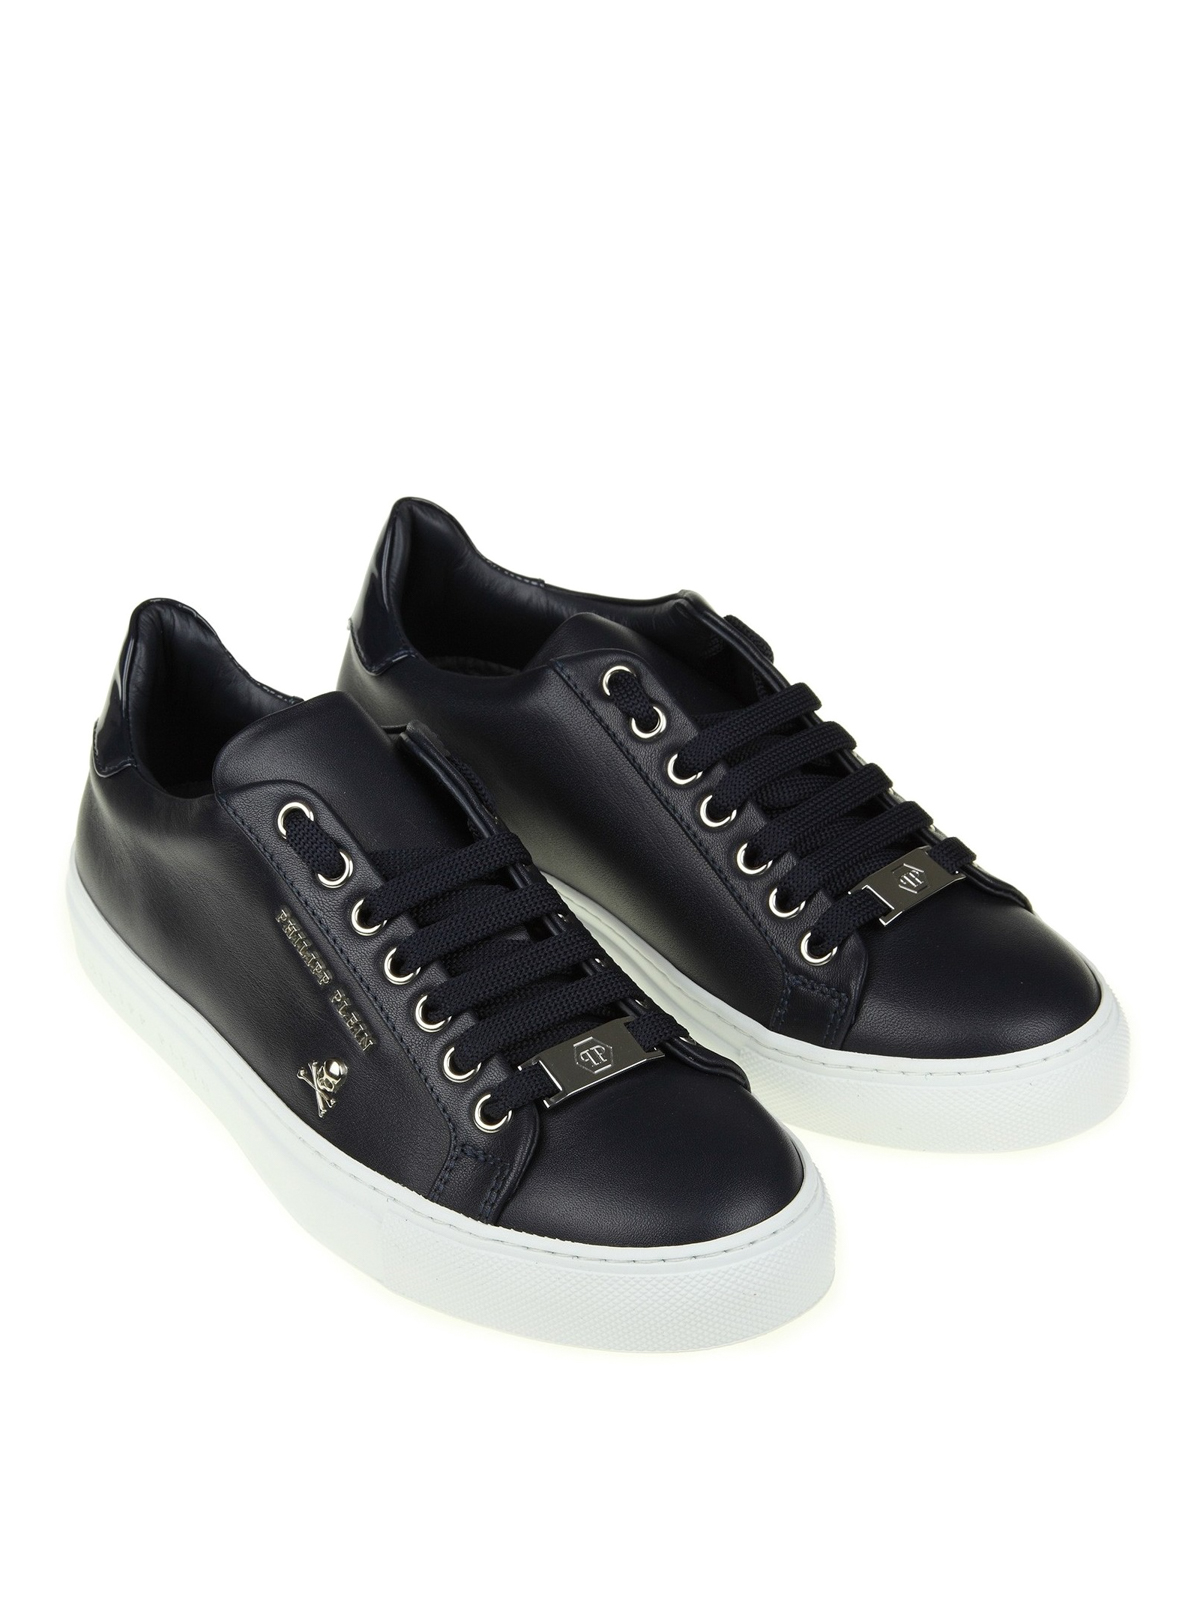 Philipp Plein - Blue Light navy leather sneakers - trainers ...